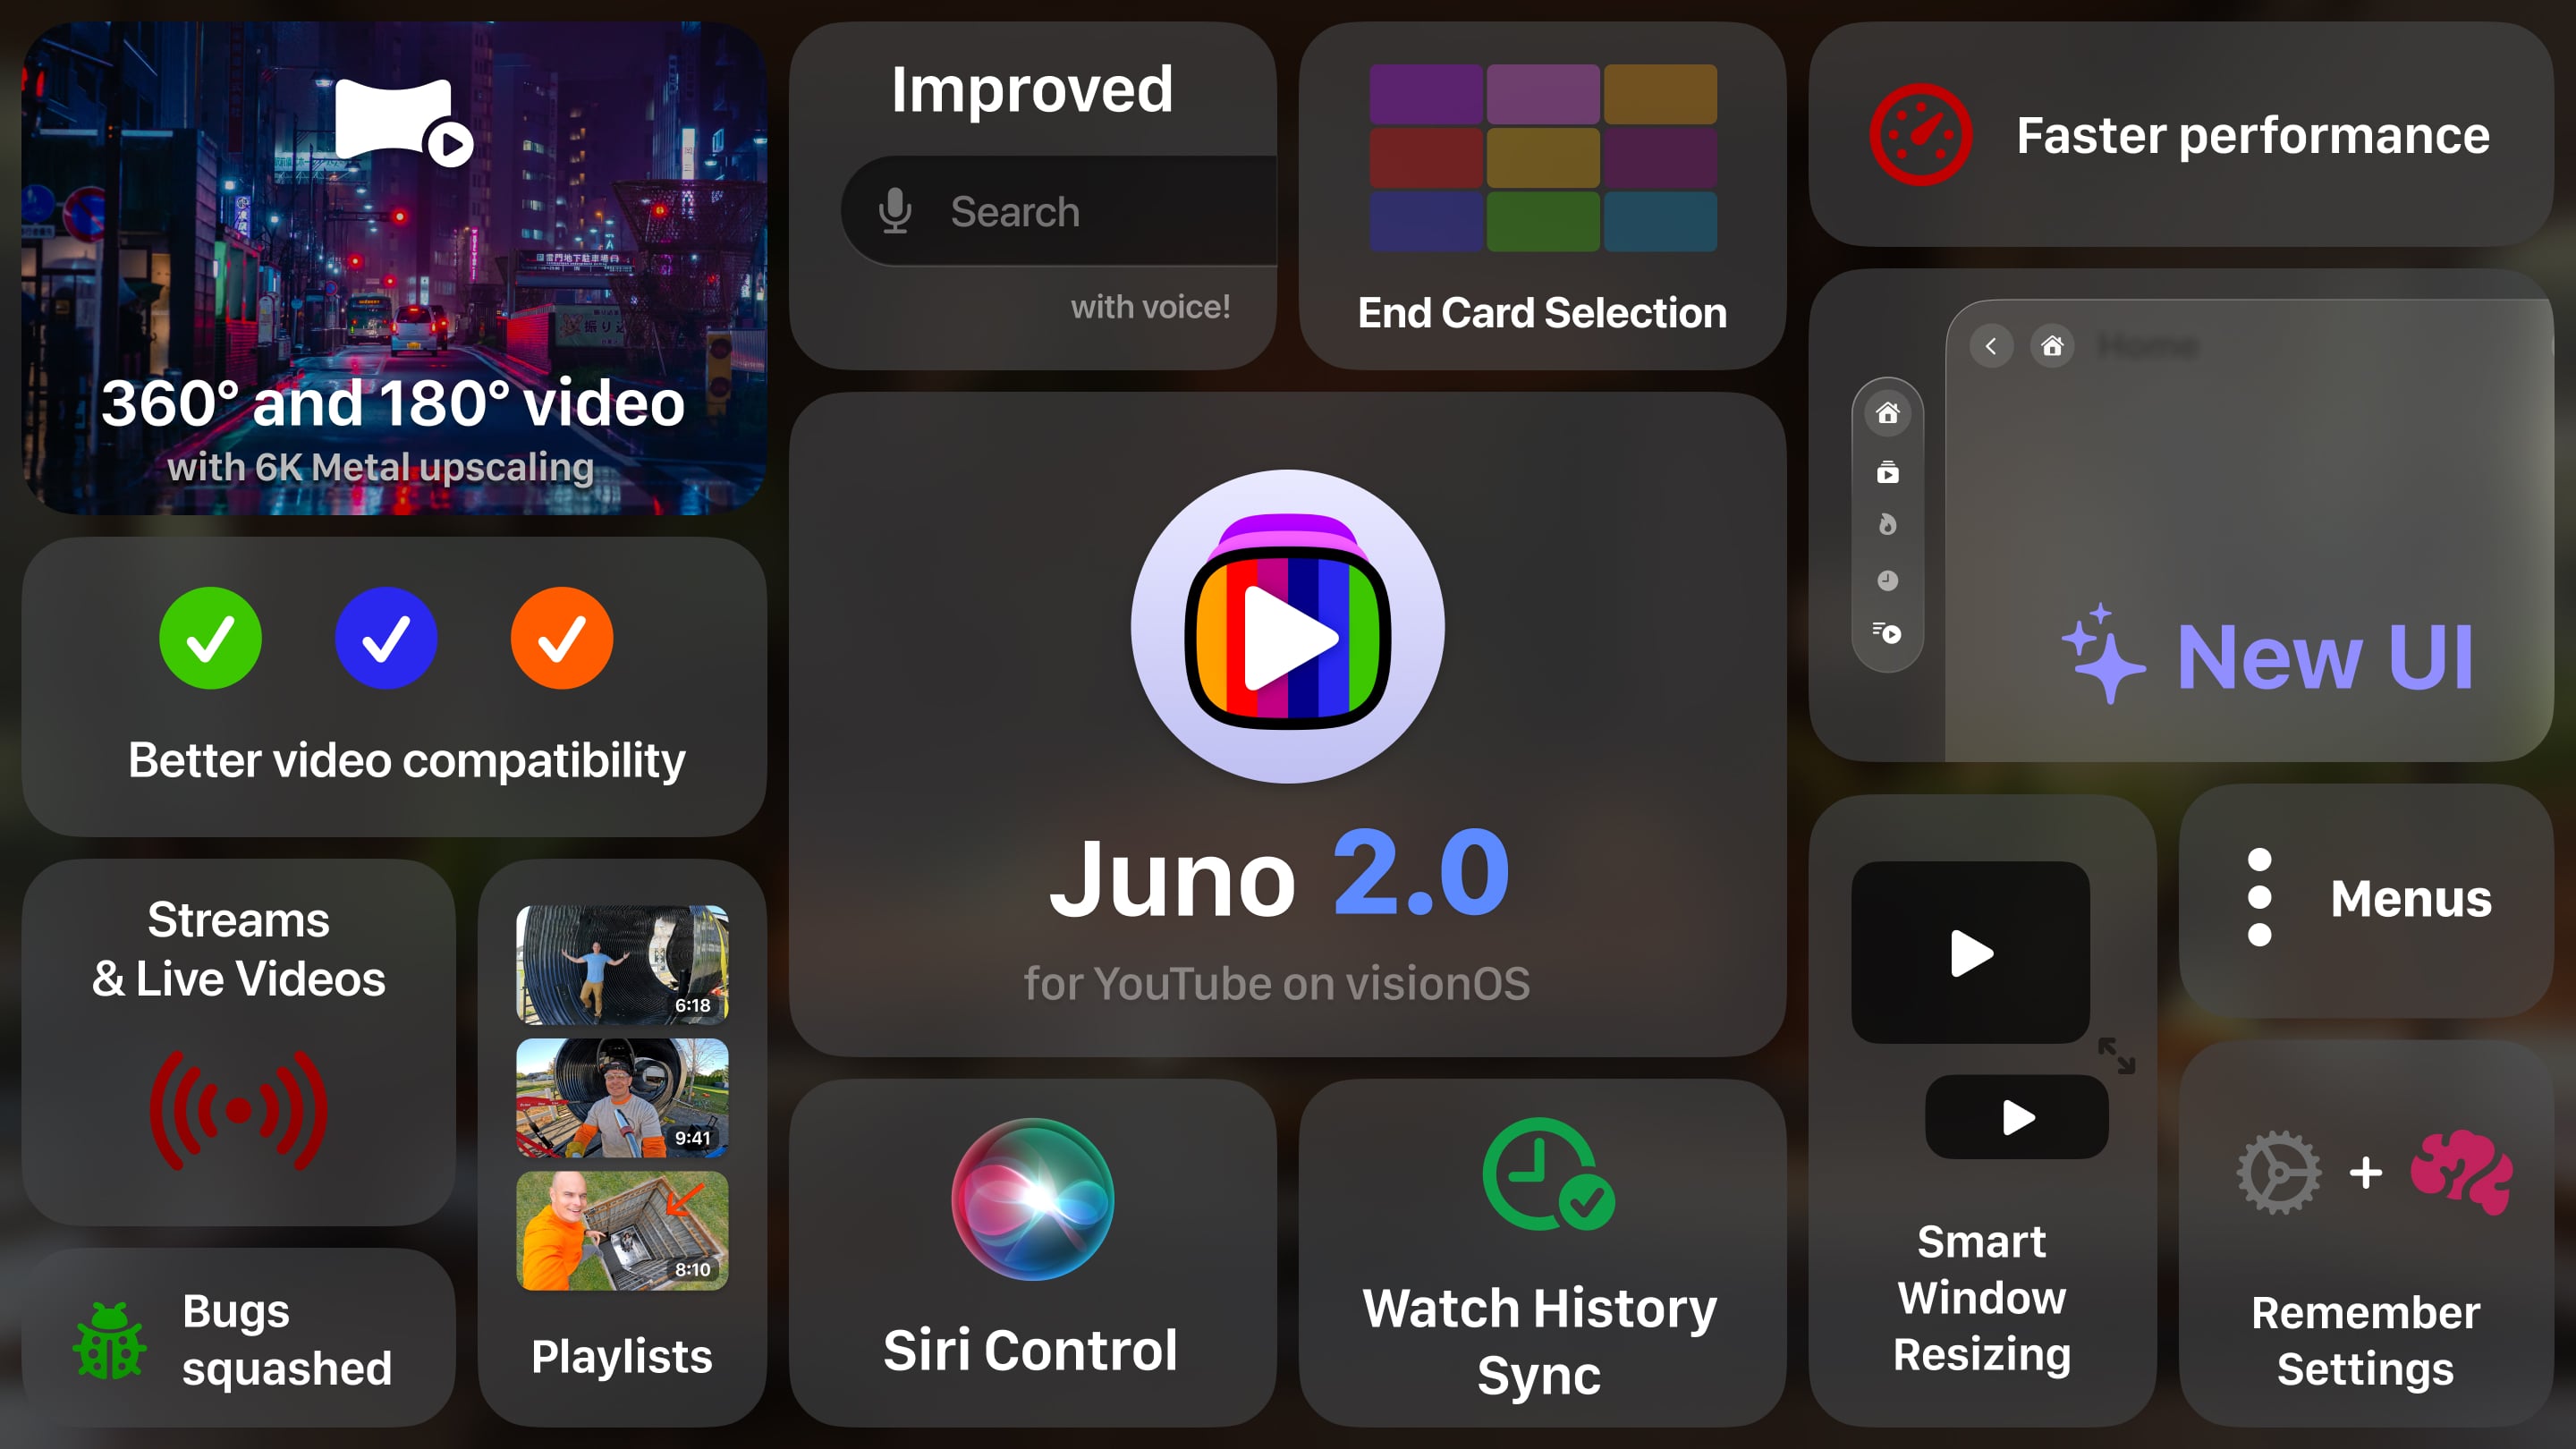 A Bento-style promotional image for Juno 2.0, a YouTube app for visionOS, highlighting its new features. The features include 360° and 180° video with 6K Metal upscaling, improved voice search, end card selection, faster performance, better video compatibility, new UI, streams and live videos, Siri control, watch history sync, playlists, smart window resizing, remember settings, and bug fixes